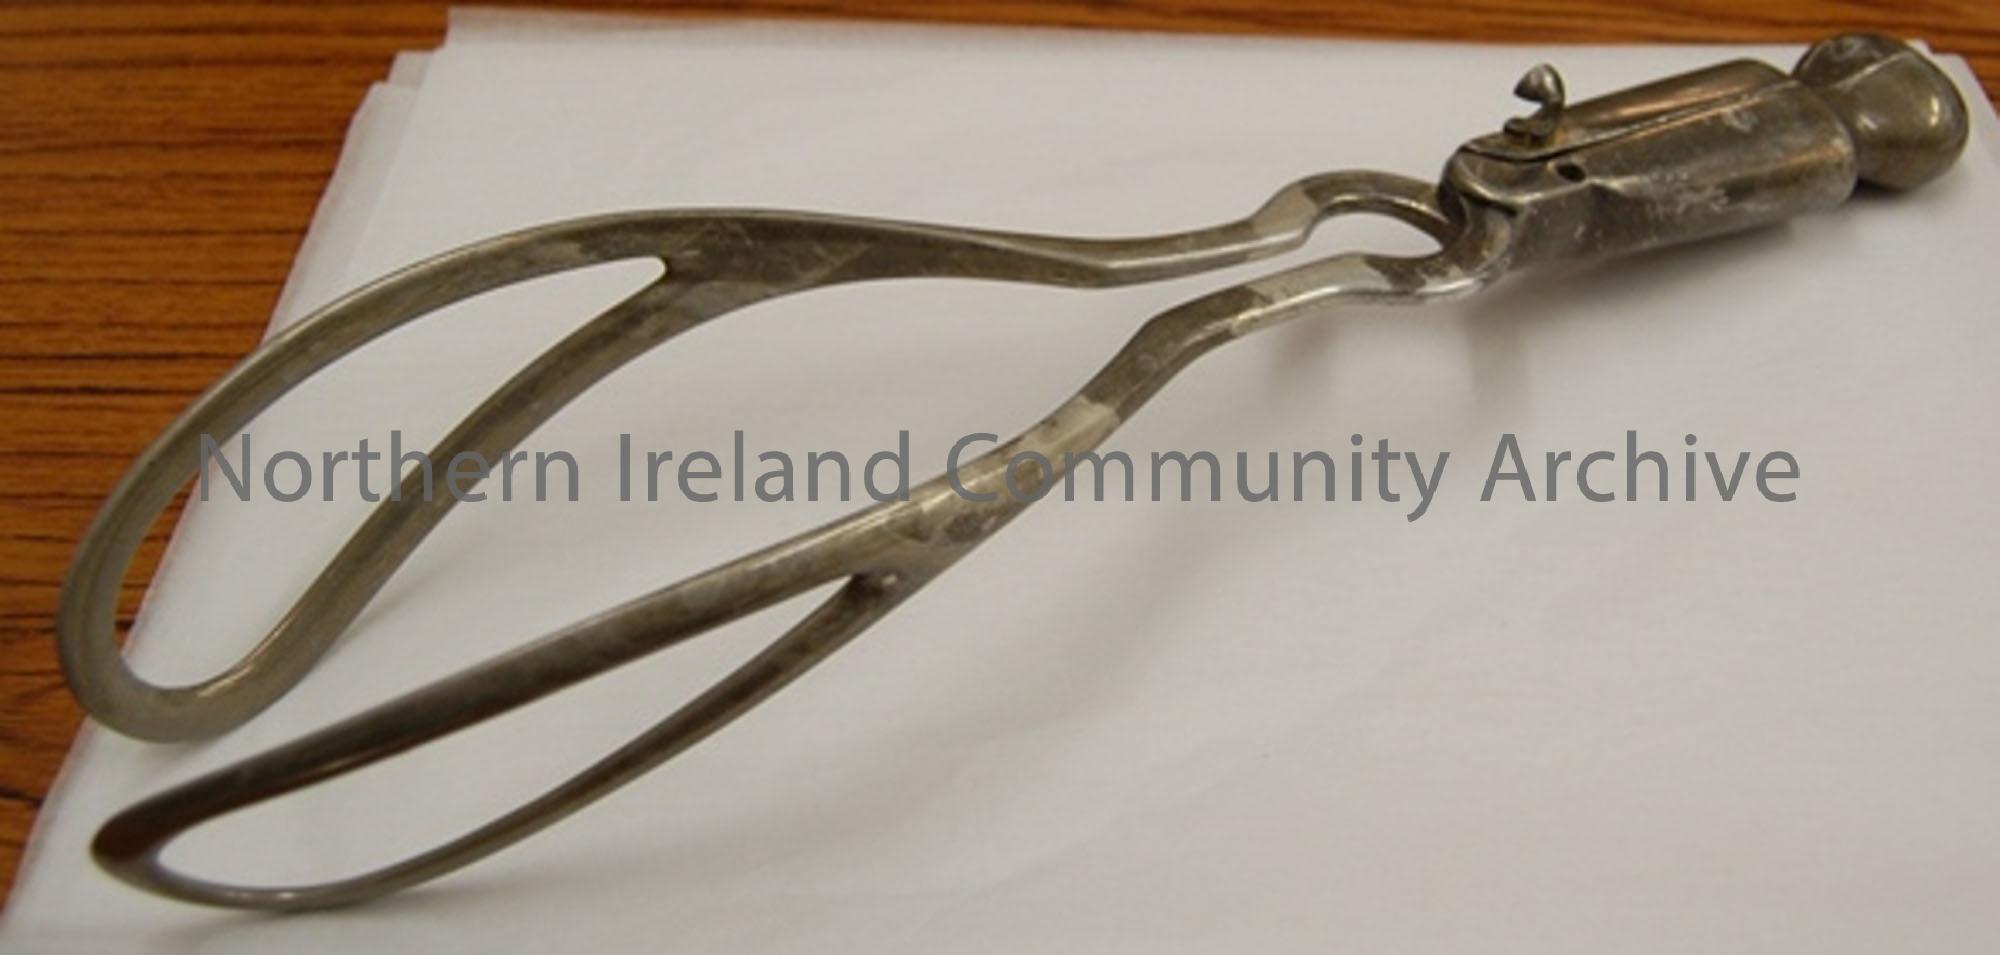 Wrigley’s forceps used in protective delivery of the baby’s head in childbirth